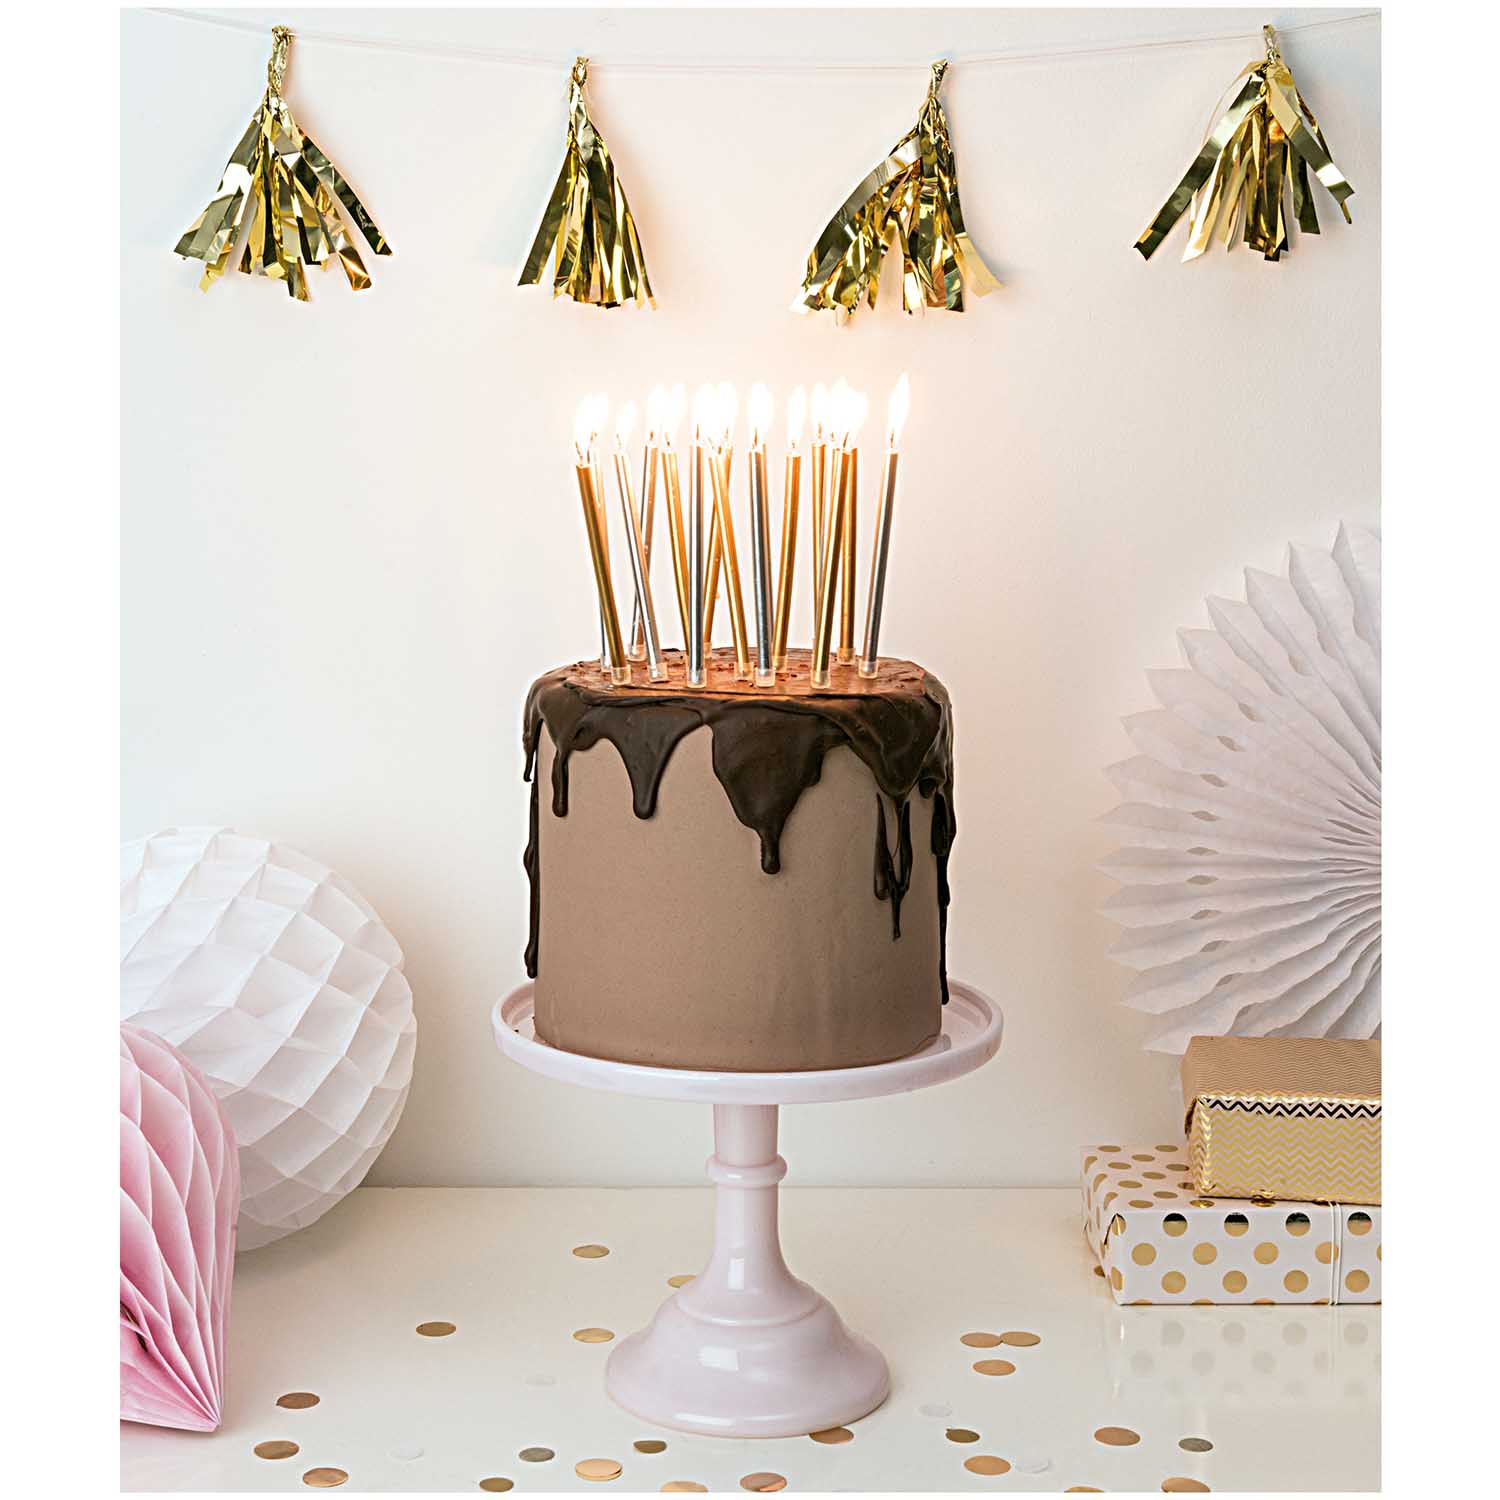 16 Transparent Cake Candle Holders